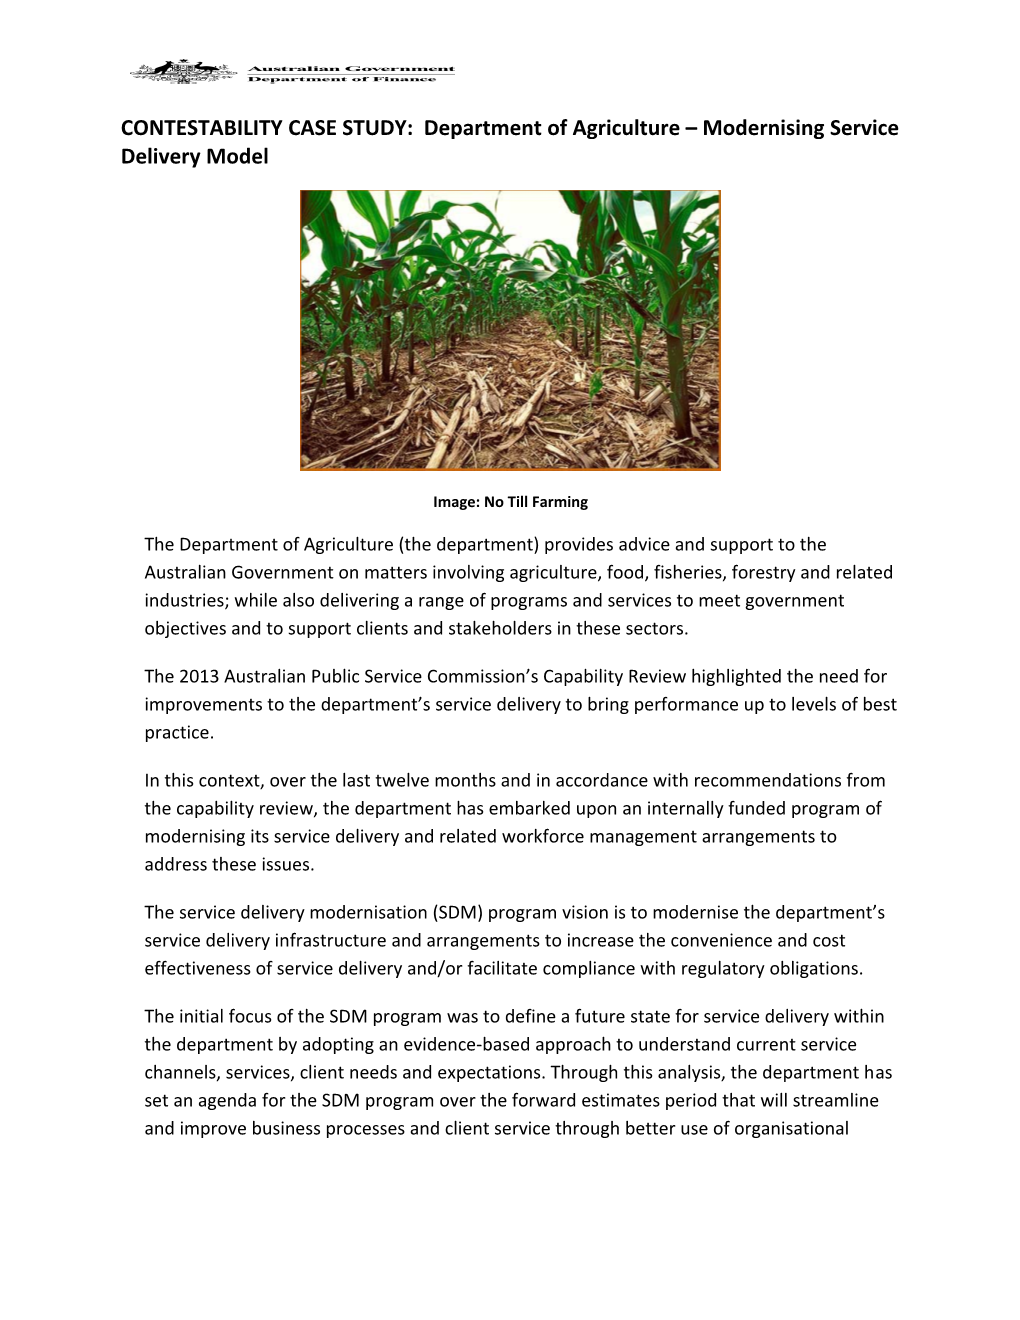 CONTESTABILITY CASE STUDY: Department of Agriculture Modernising Service Delivery Model